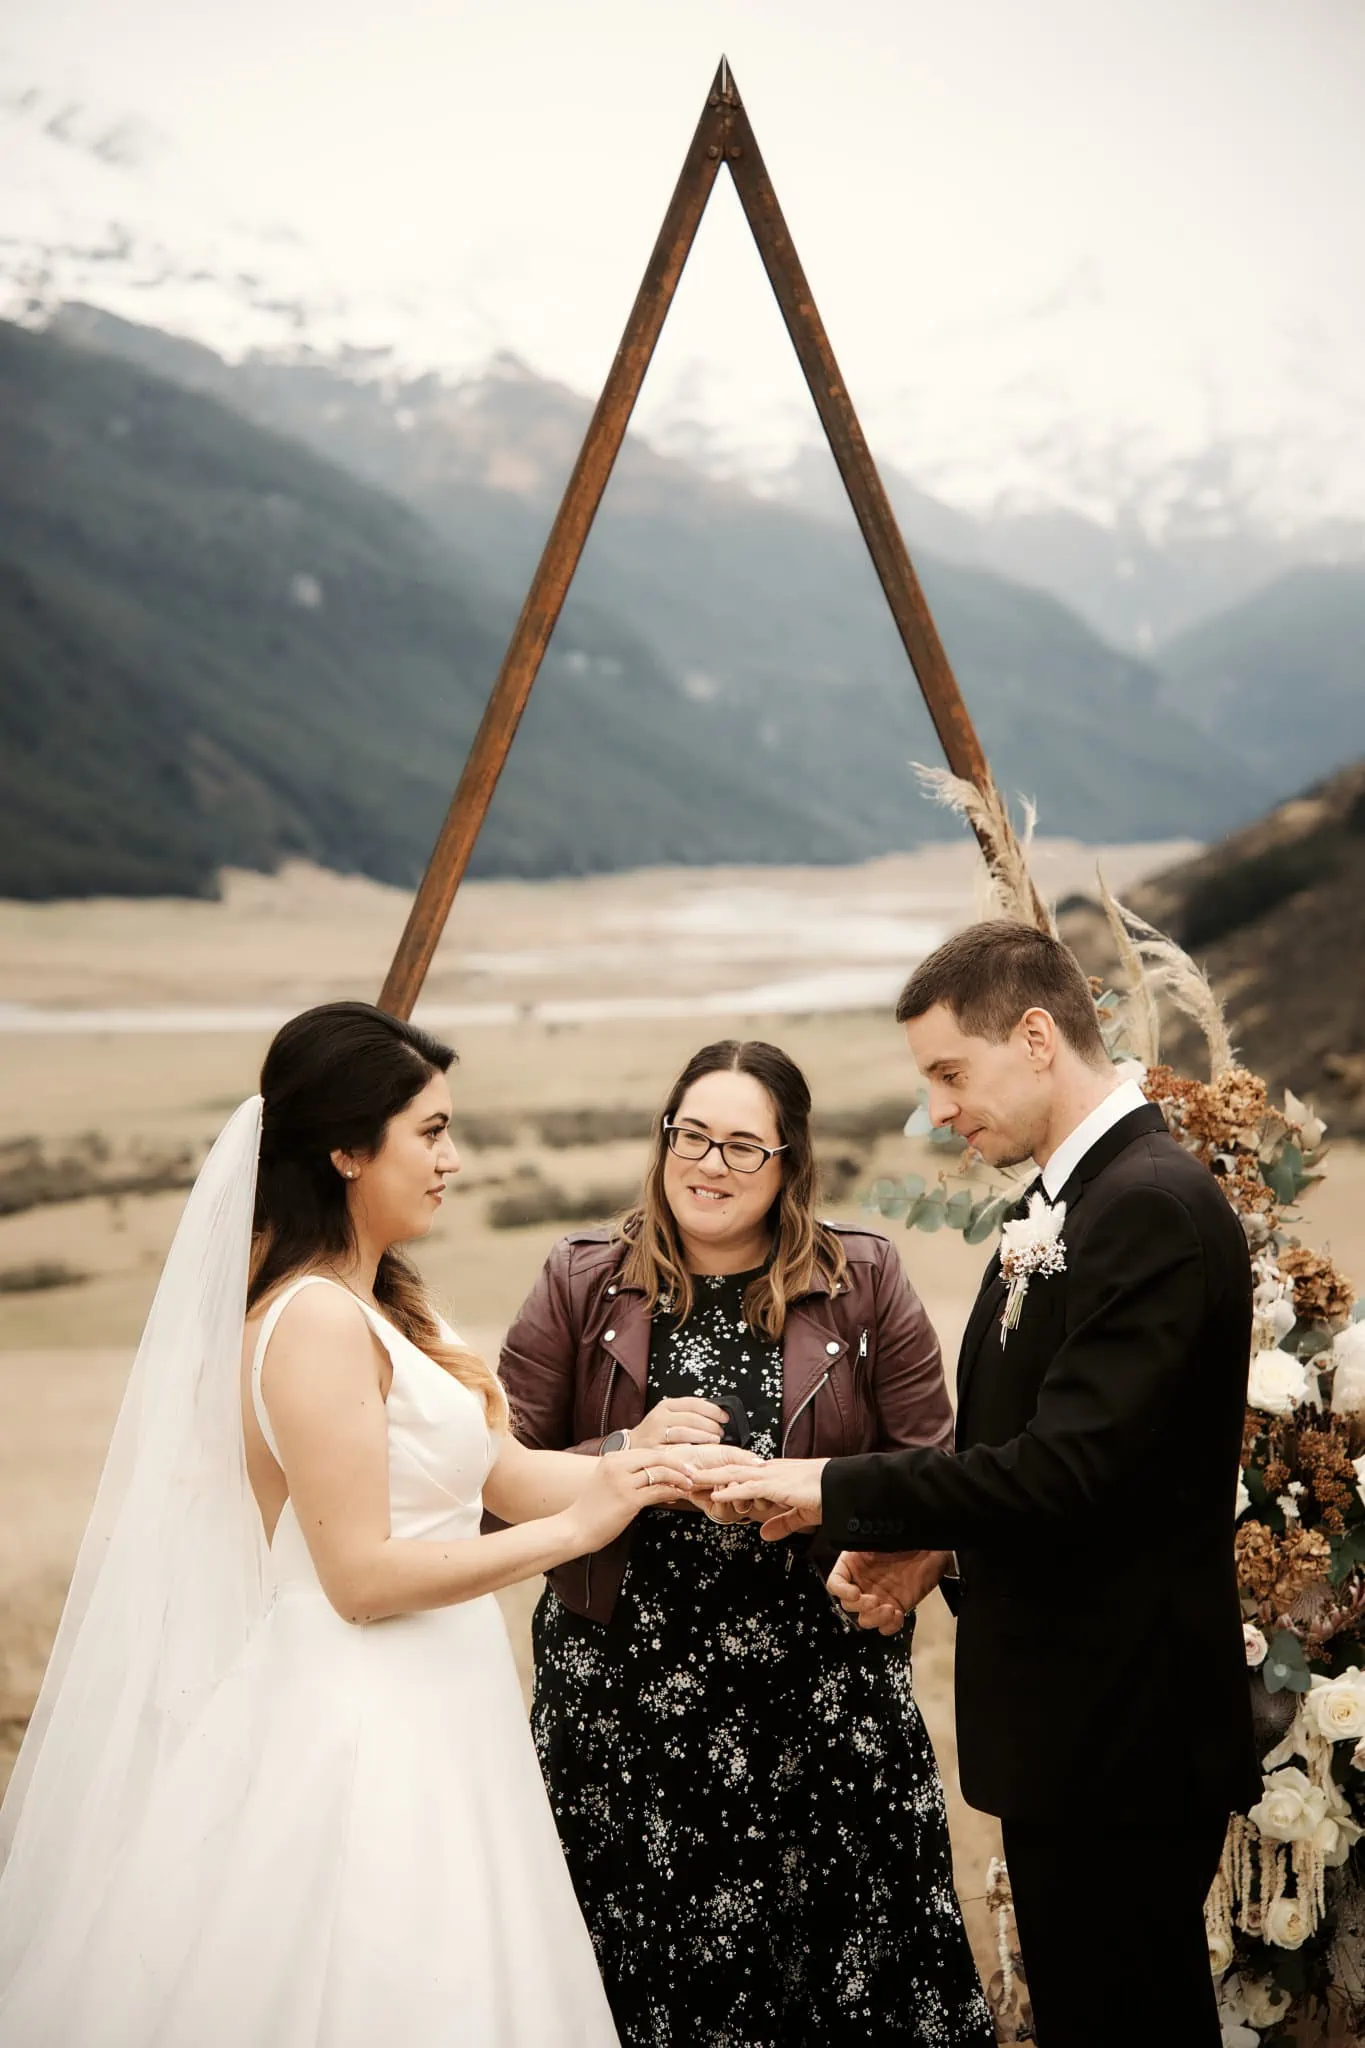 Michelle and Vedran's elopement wedding at Rees Valley Station features a breathtaking ceremony where they exchange vows against the backdrop of majestic mountains.